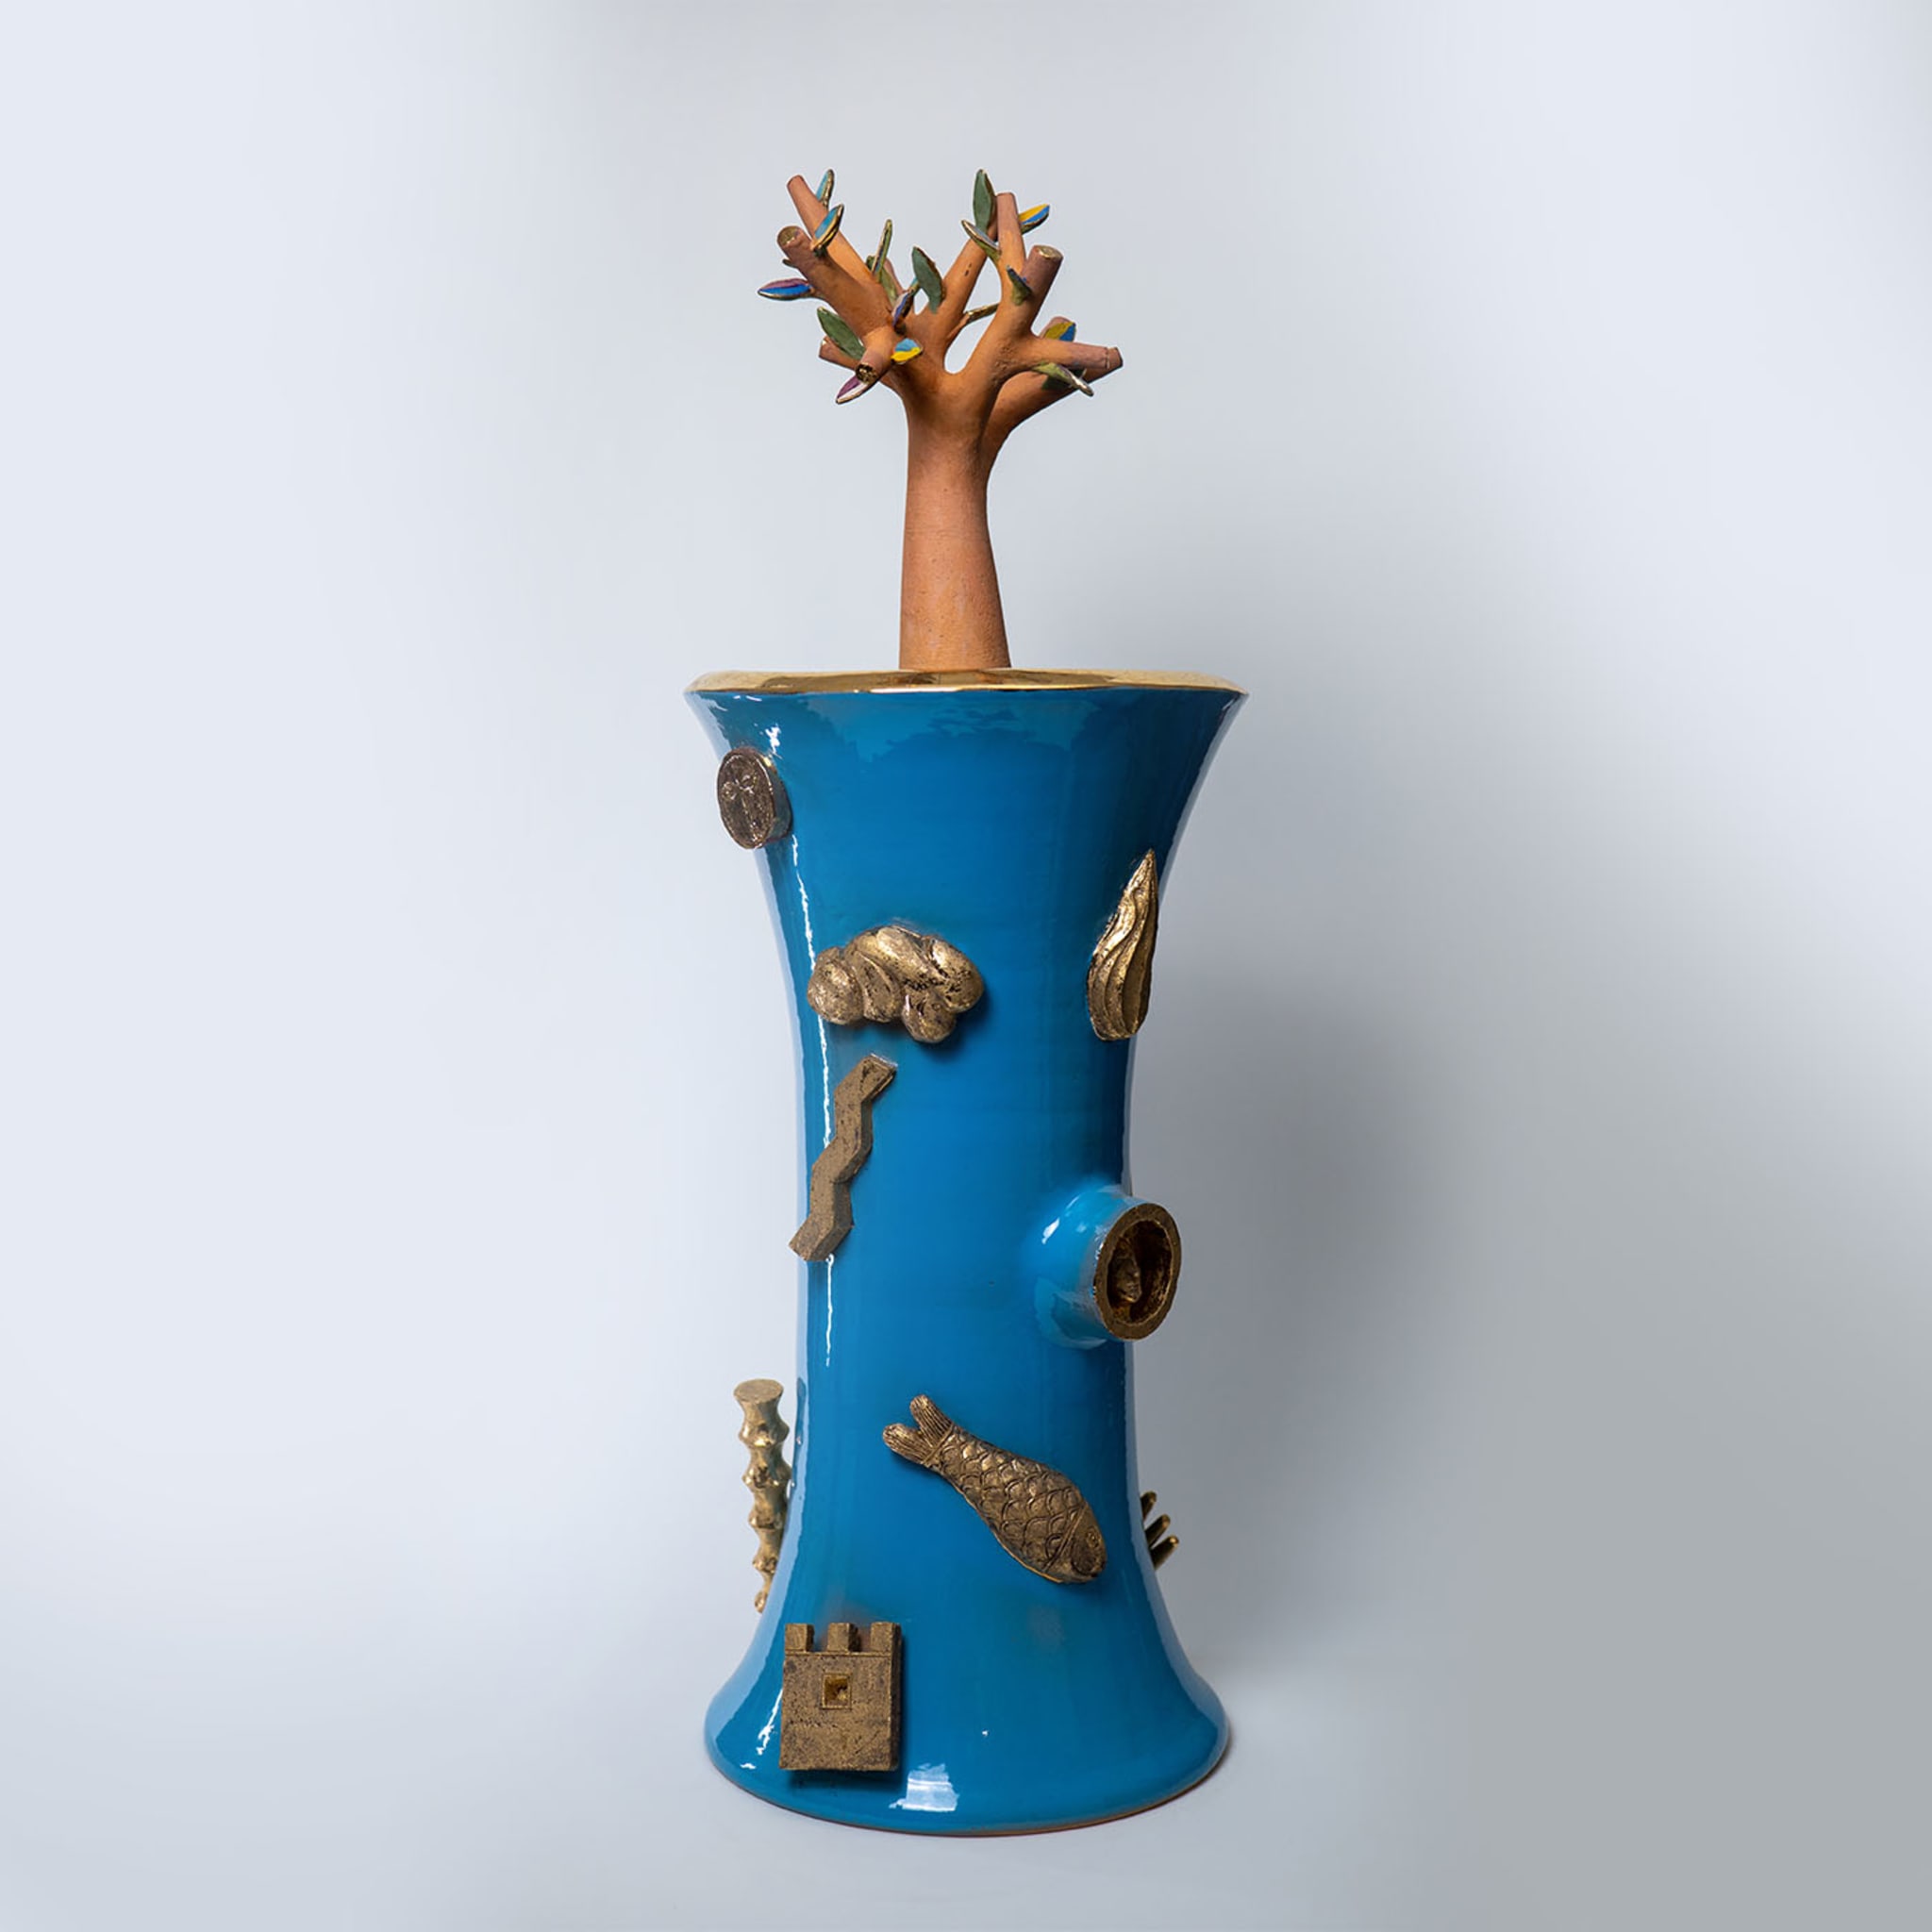 The Tree of All Things Polychrome Sculpture - Alternative view 1